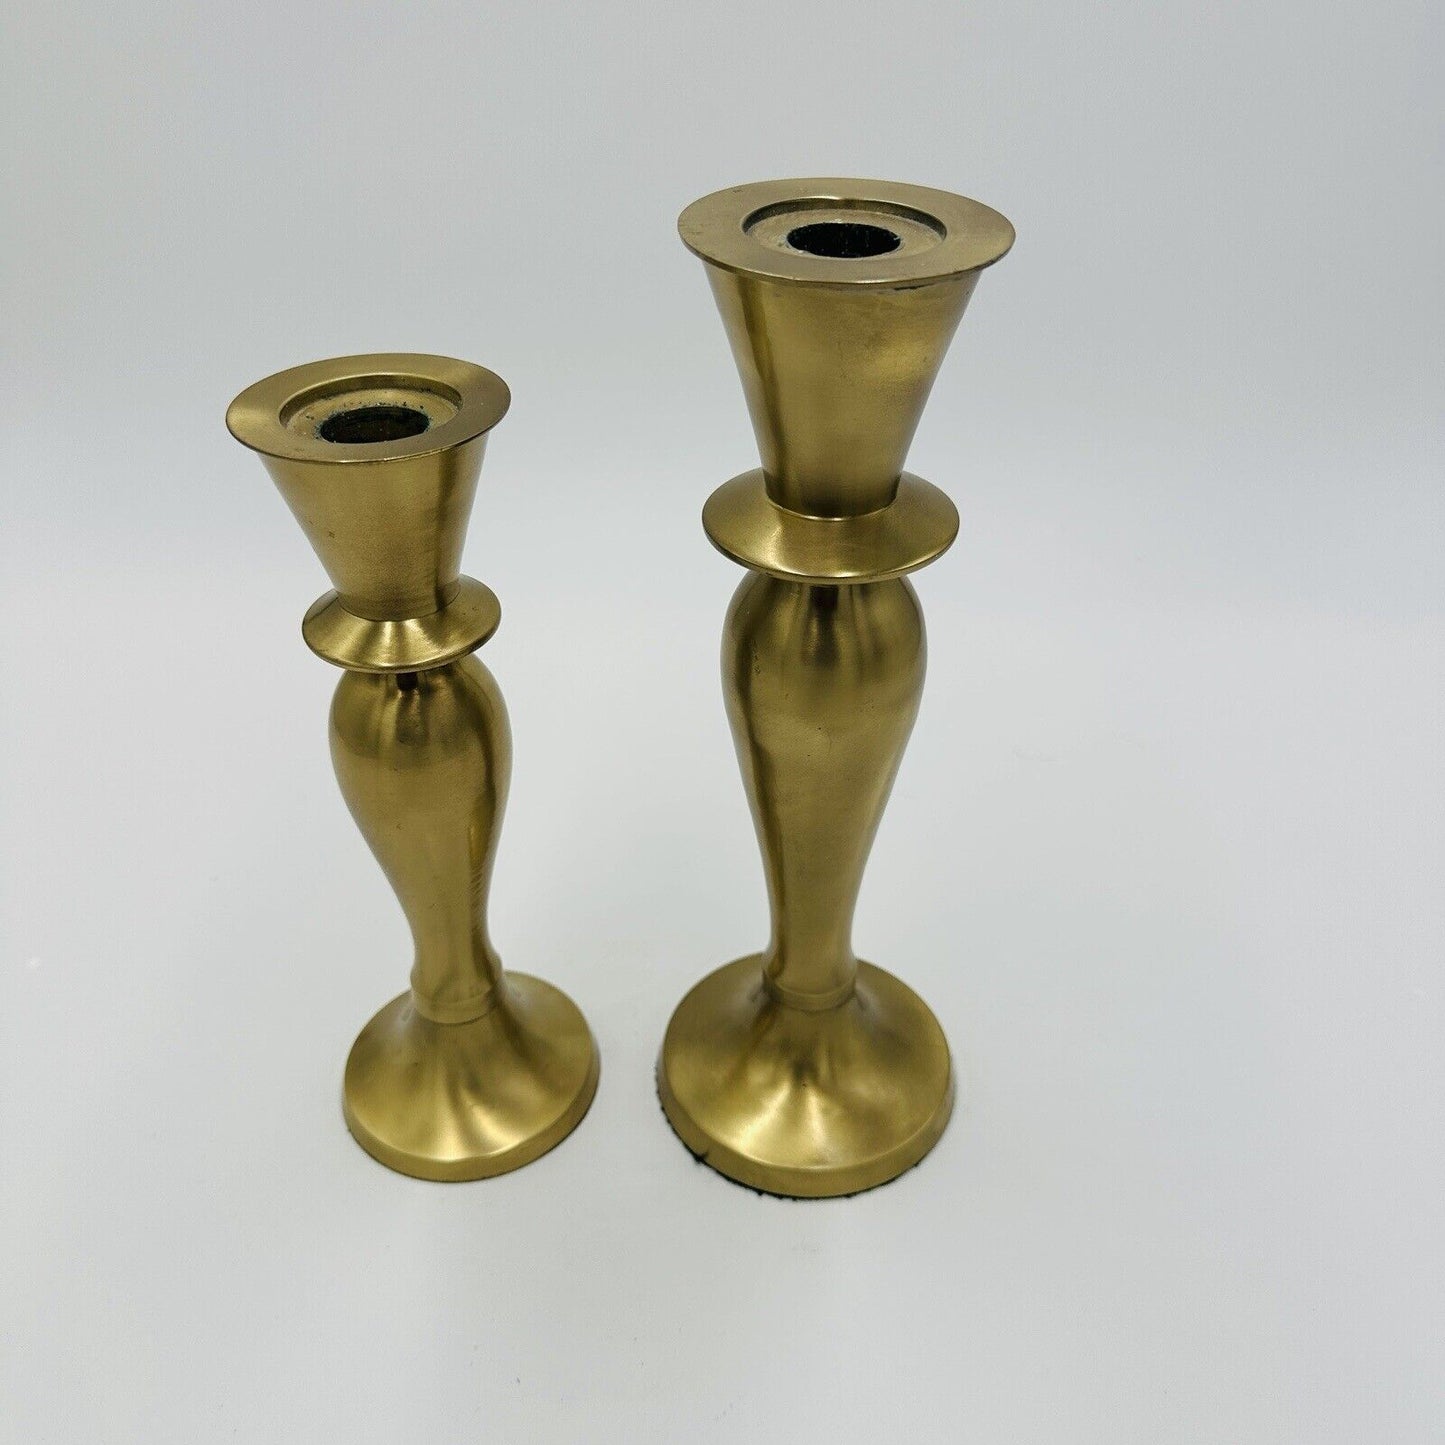 2 Brass Candleholders Tabletop IHI Solid Made In India Large Vintage Dining